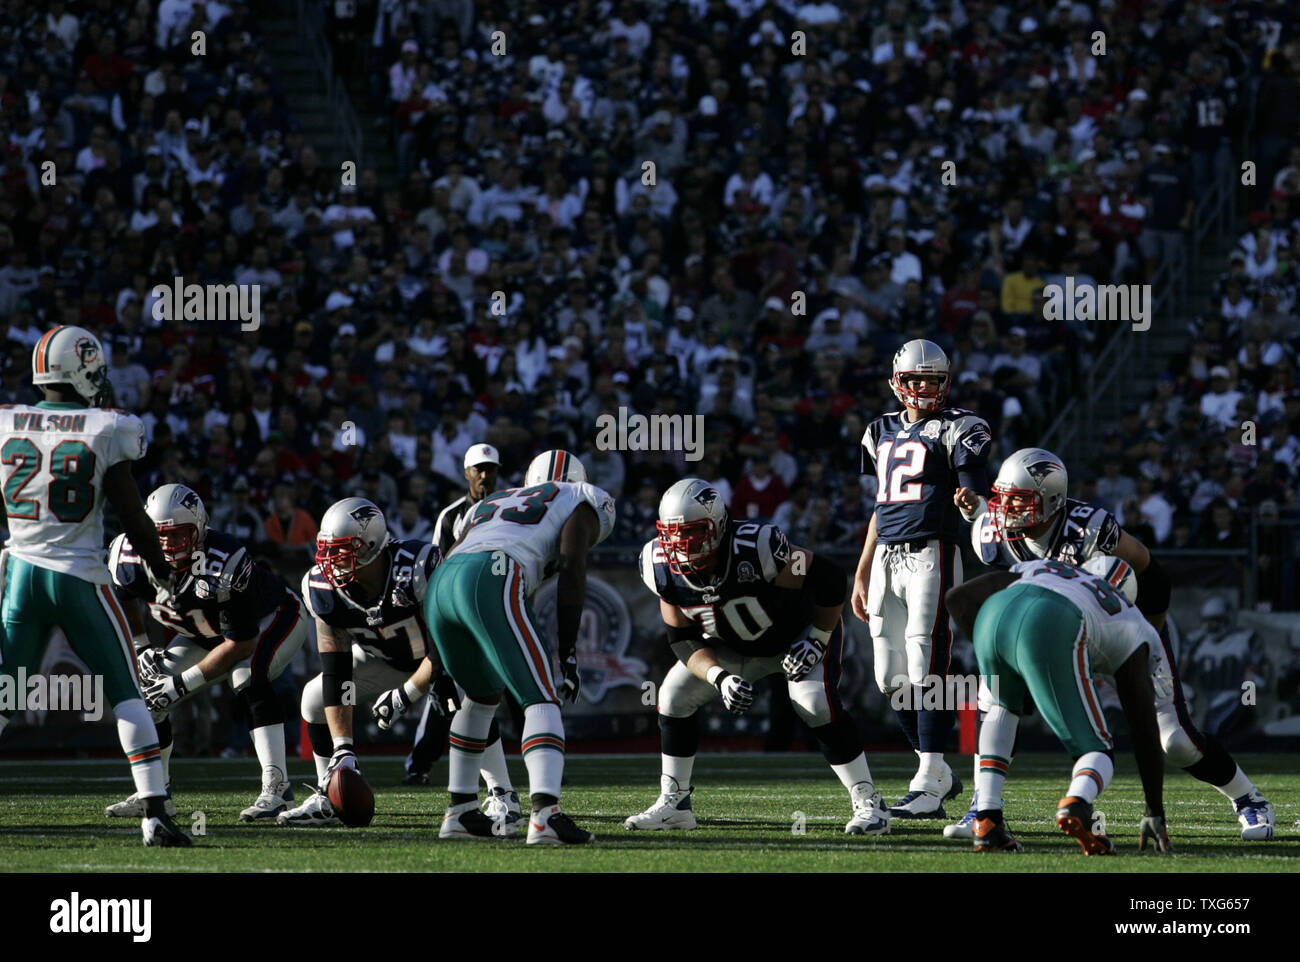 New England Patriots quarterback Tom Brady (12) lines up against the Miami Dolphins in the second quarter at Gillette Stadium in Foxboro, Massachusetts on November 8, 2009.  The Patriots defeated the Dolphins 27-17.    UPI/Matthew Healey Stock Photo